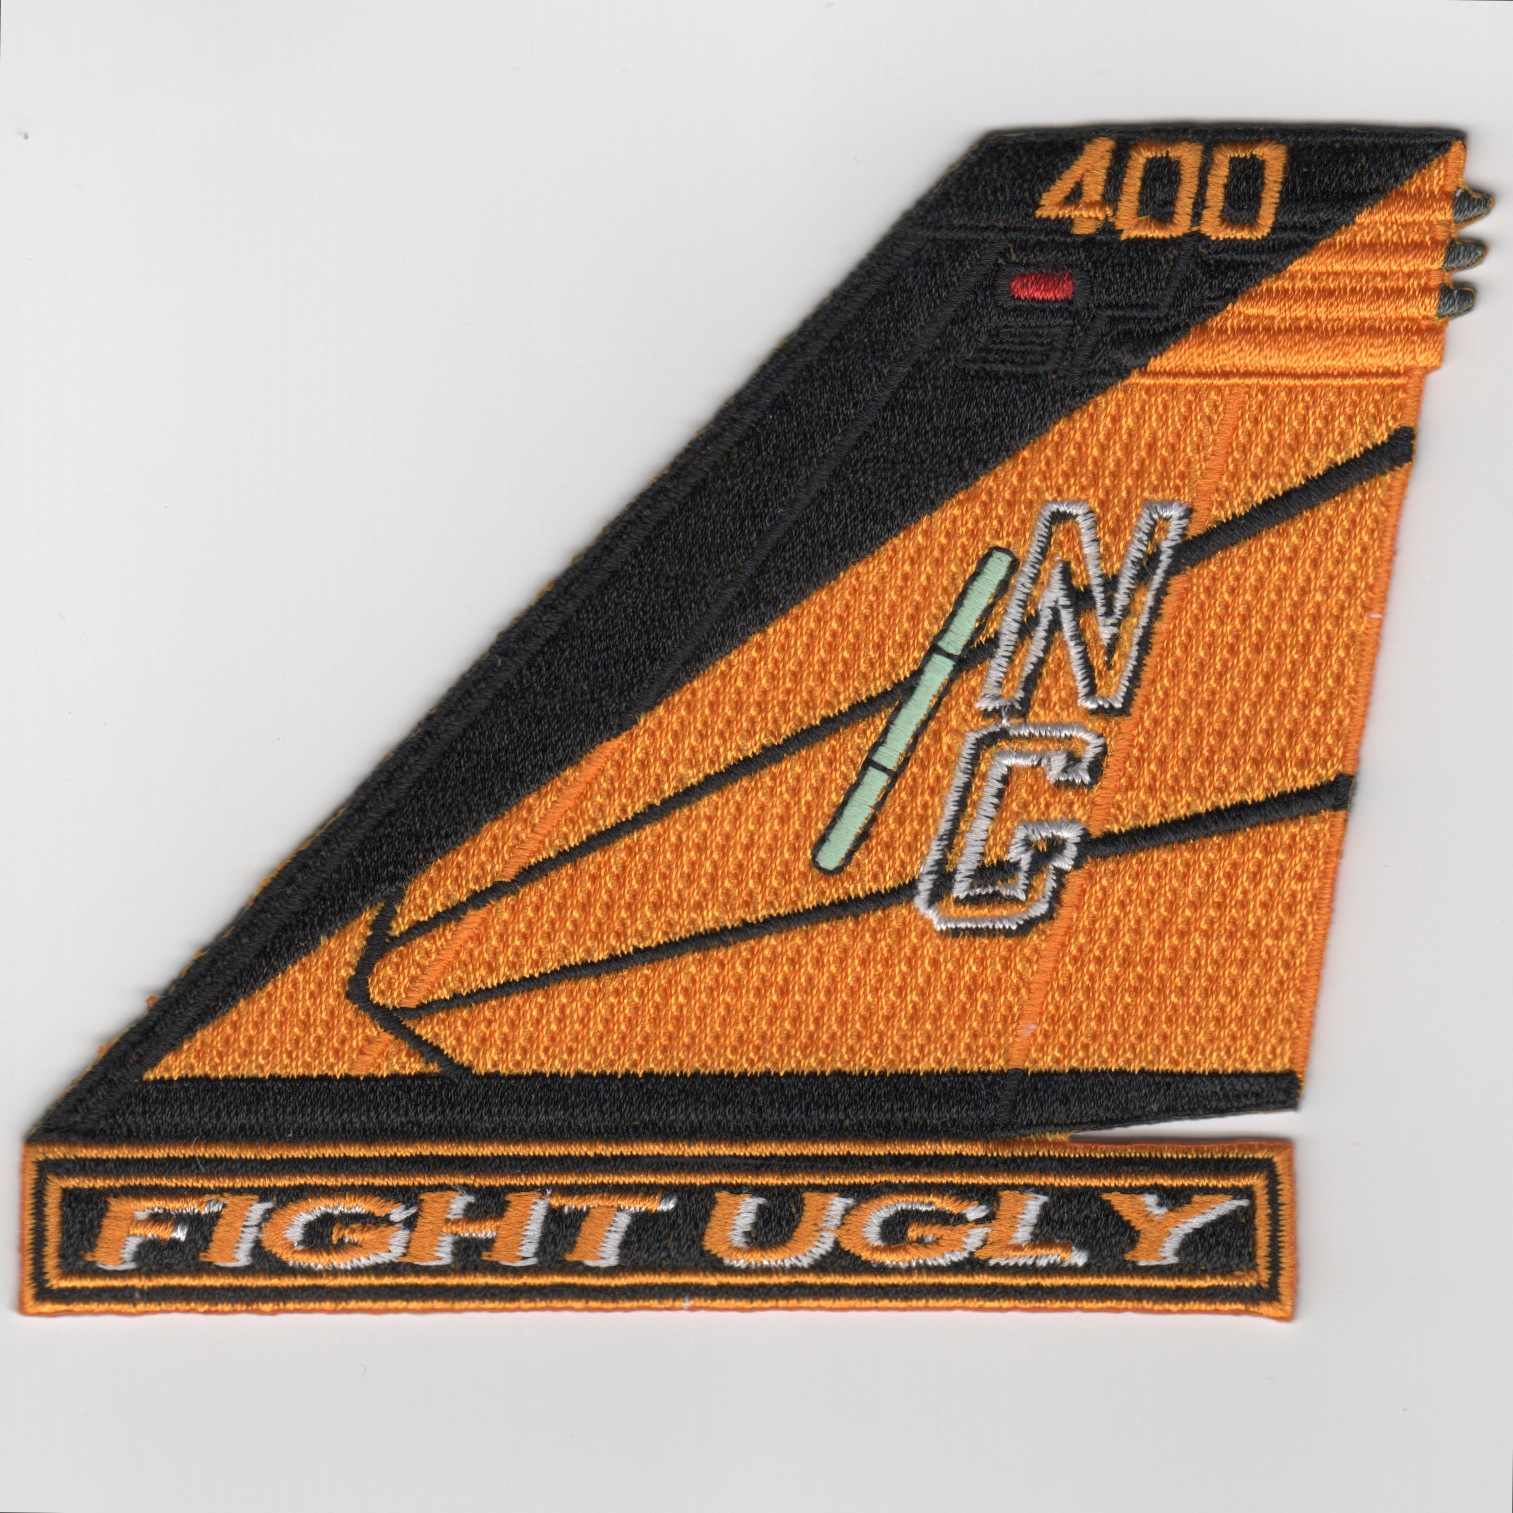 VFA-151 'Fight Ugly' TailFin (400)